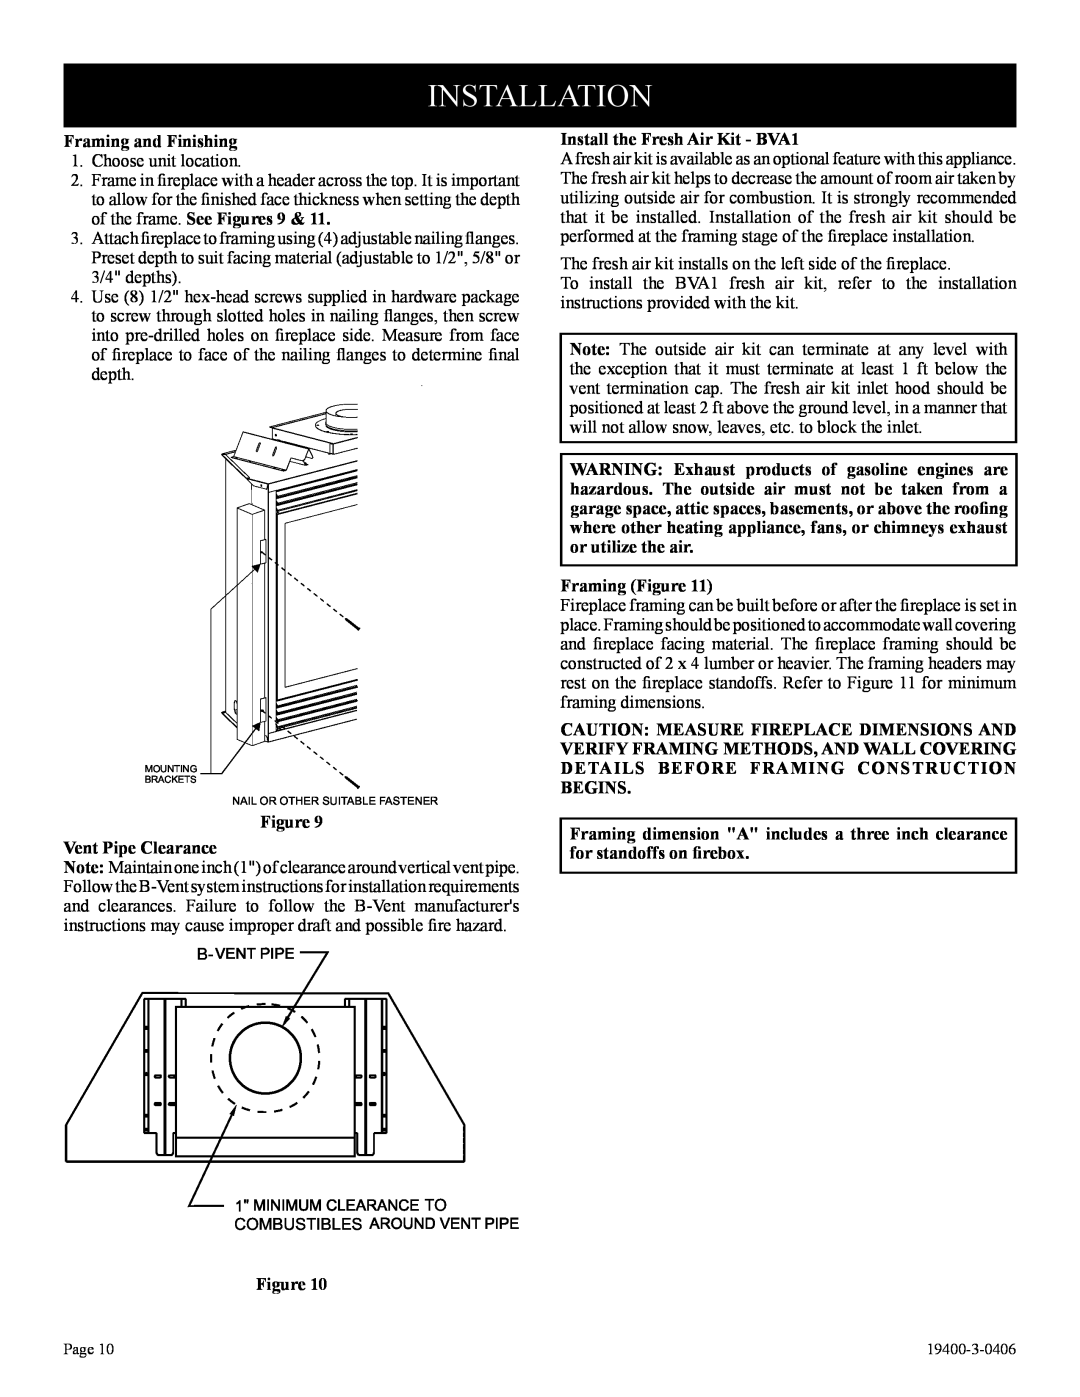 Vulcan-Hart BVD36FP32(F,L)N-1 Installation, Framing and Finishing, Figure Vent Pipe Clearance, Framing Figure 